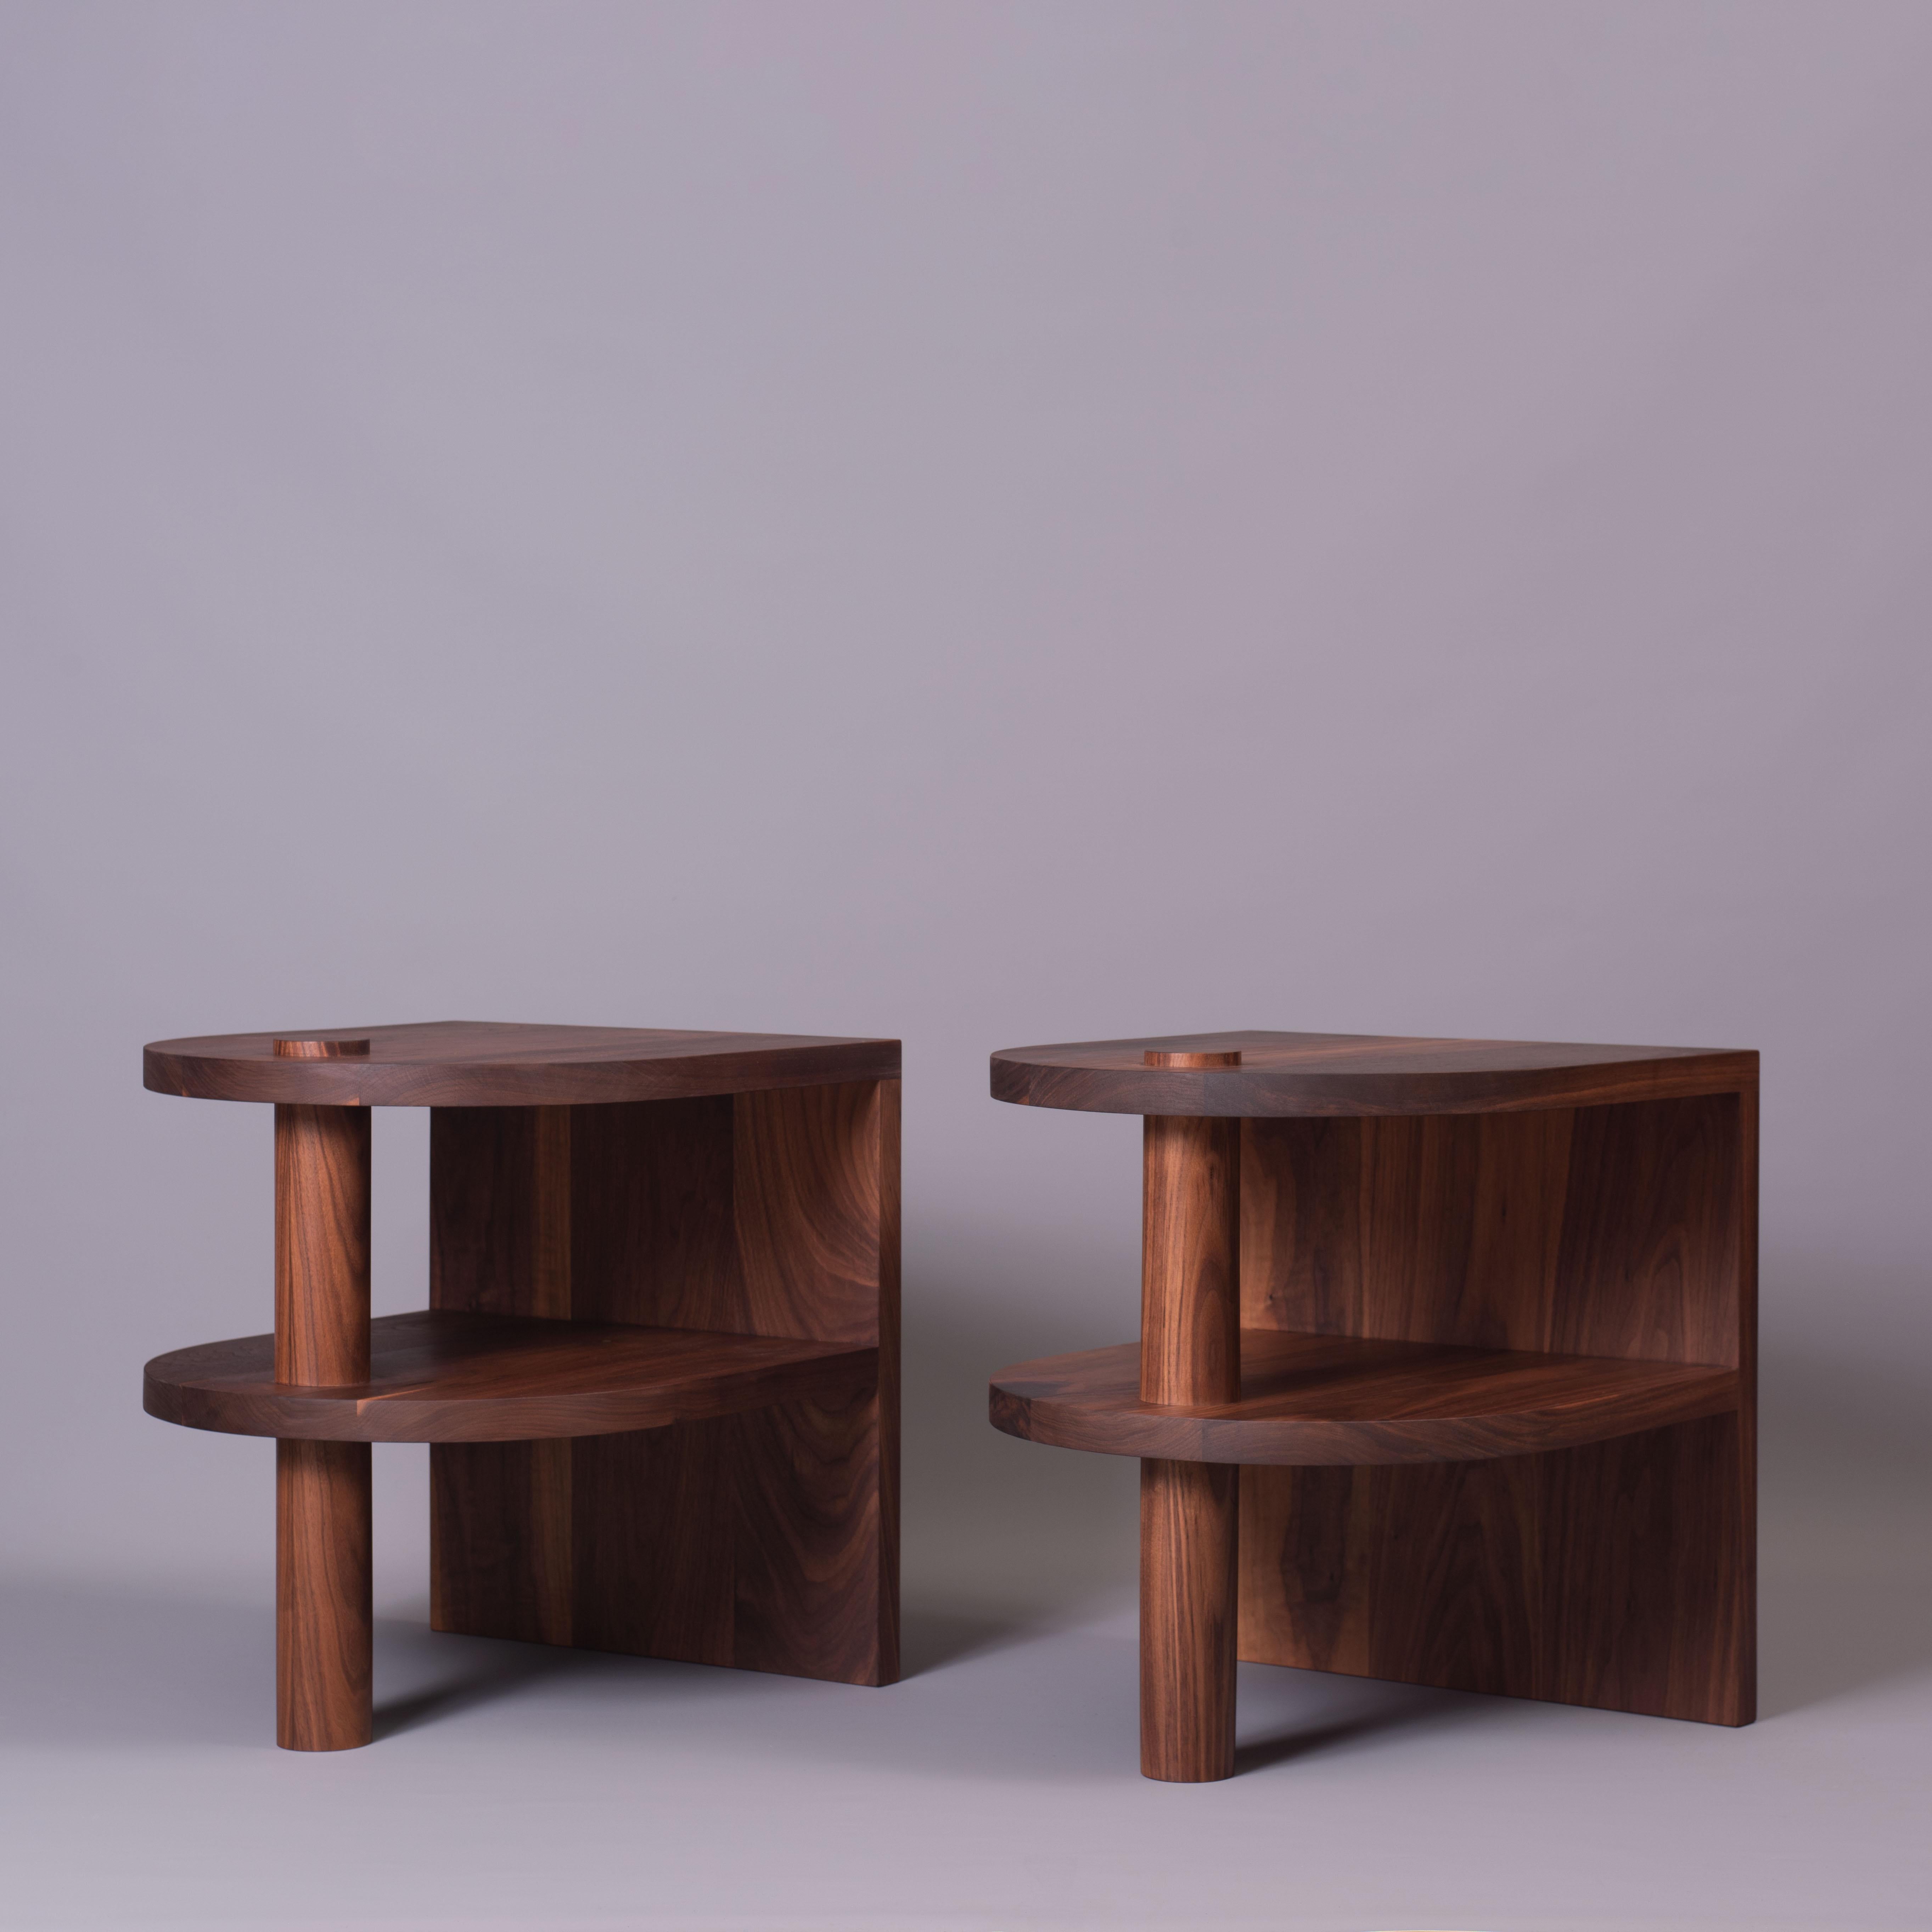 A Larger version of our architectural postmodern American black walnut pillar nightstands / end tables. Design and handcrafted in England using traditional woodwork techniques with the very finest black walnut. Hand-cut large dovetail jointing with